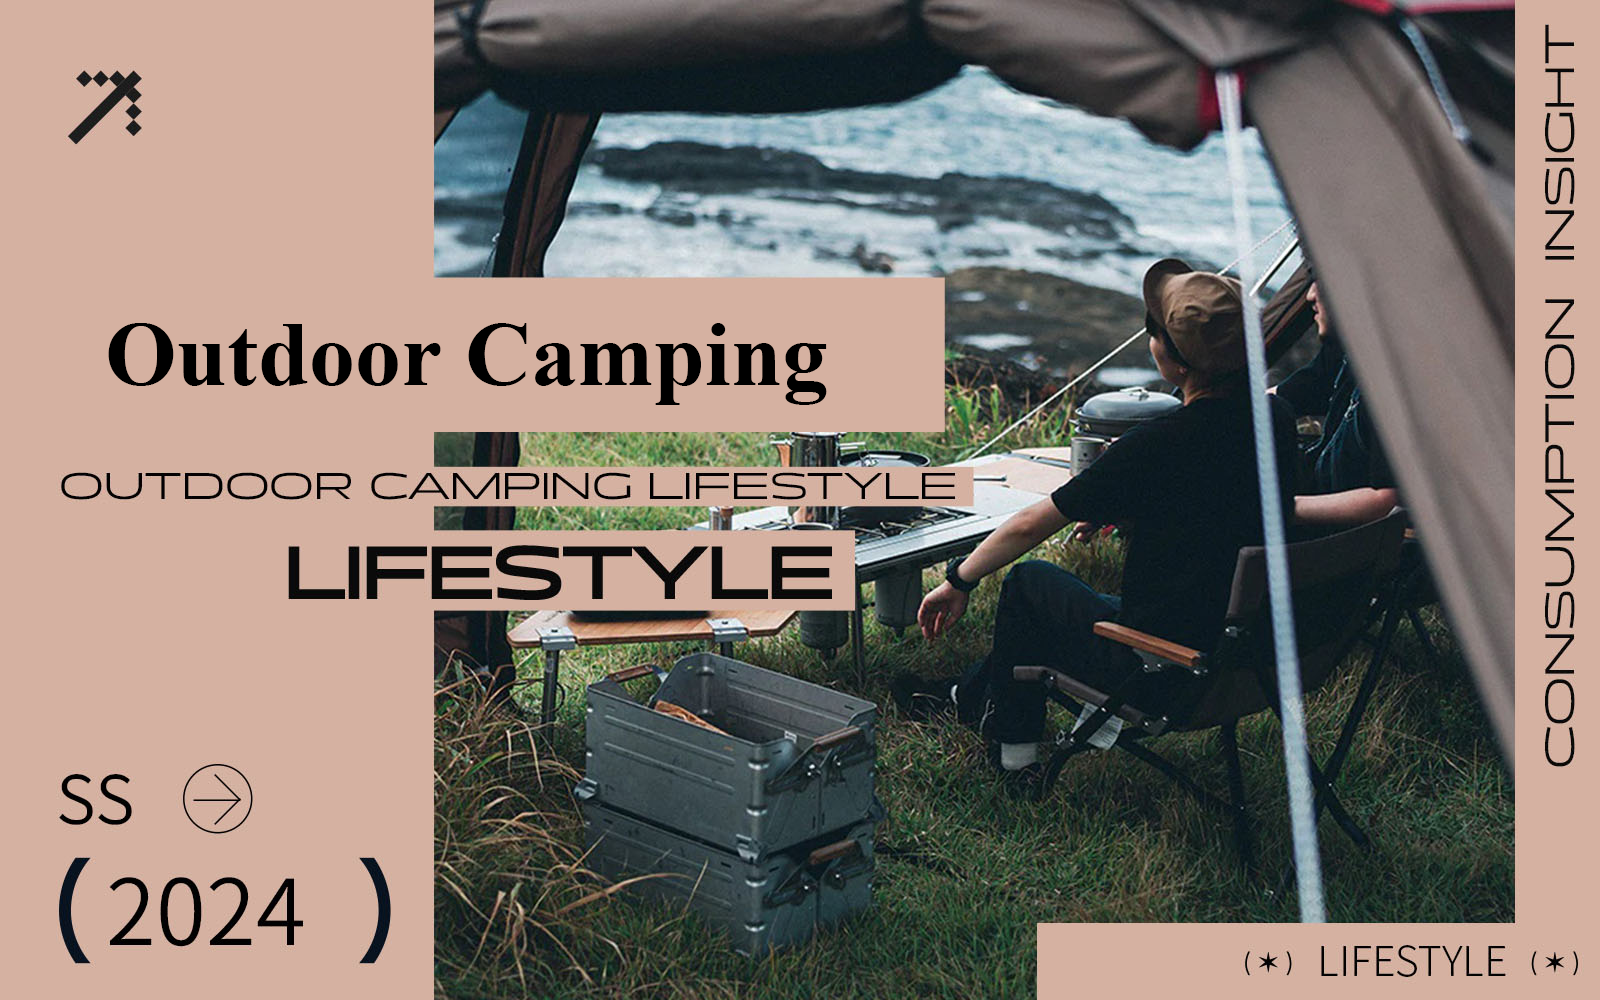 Outdoor Camping -- S/S 2024 Lifestyle Prediction